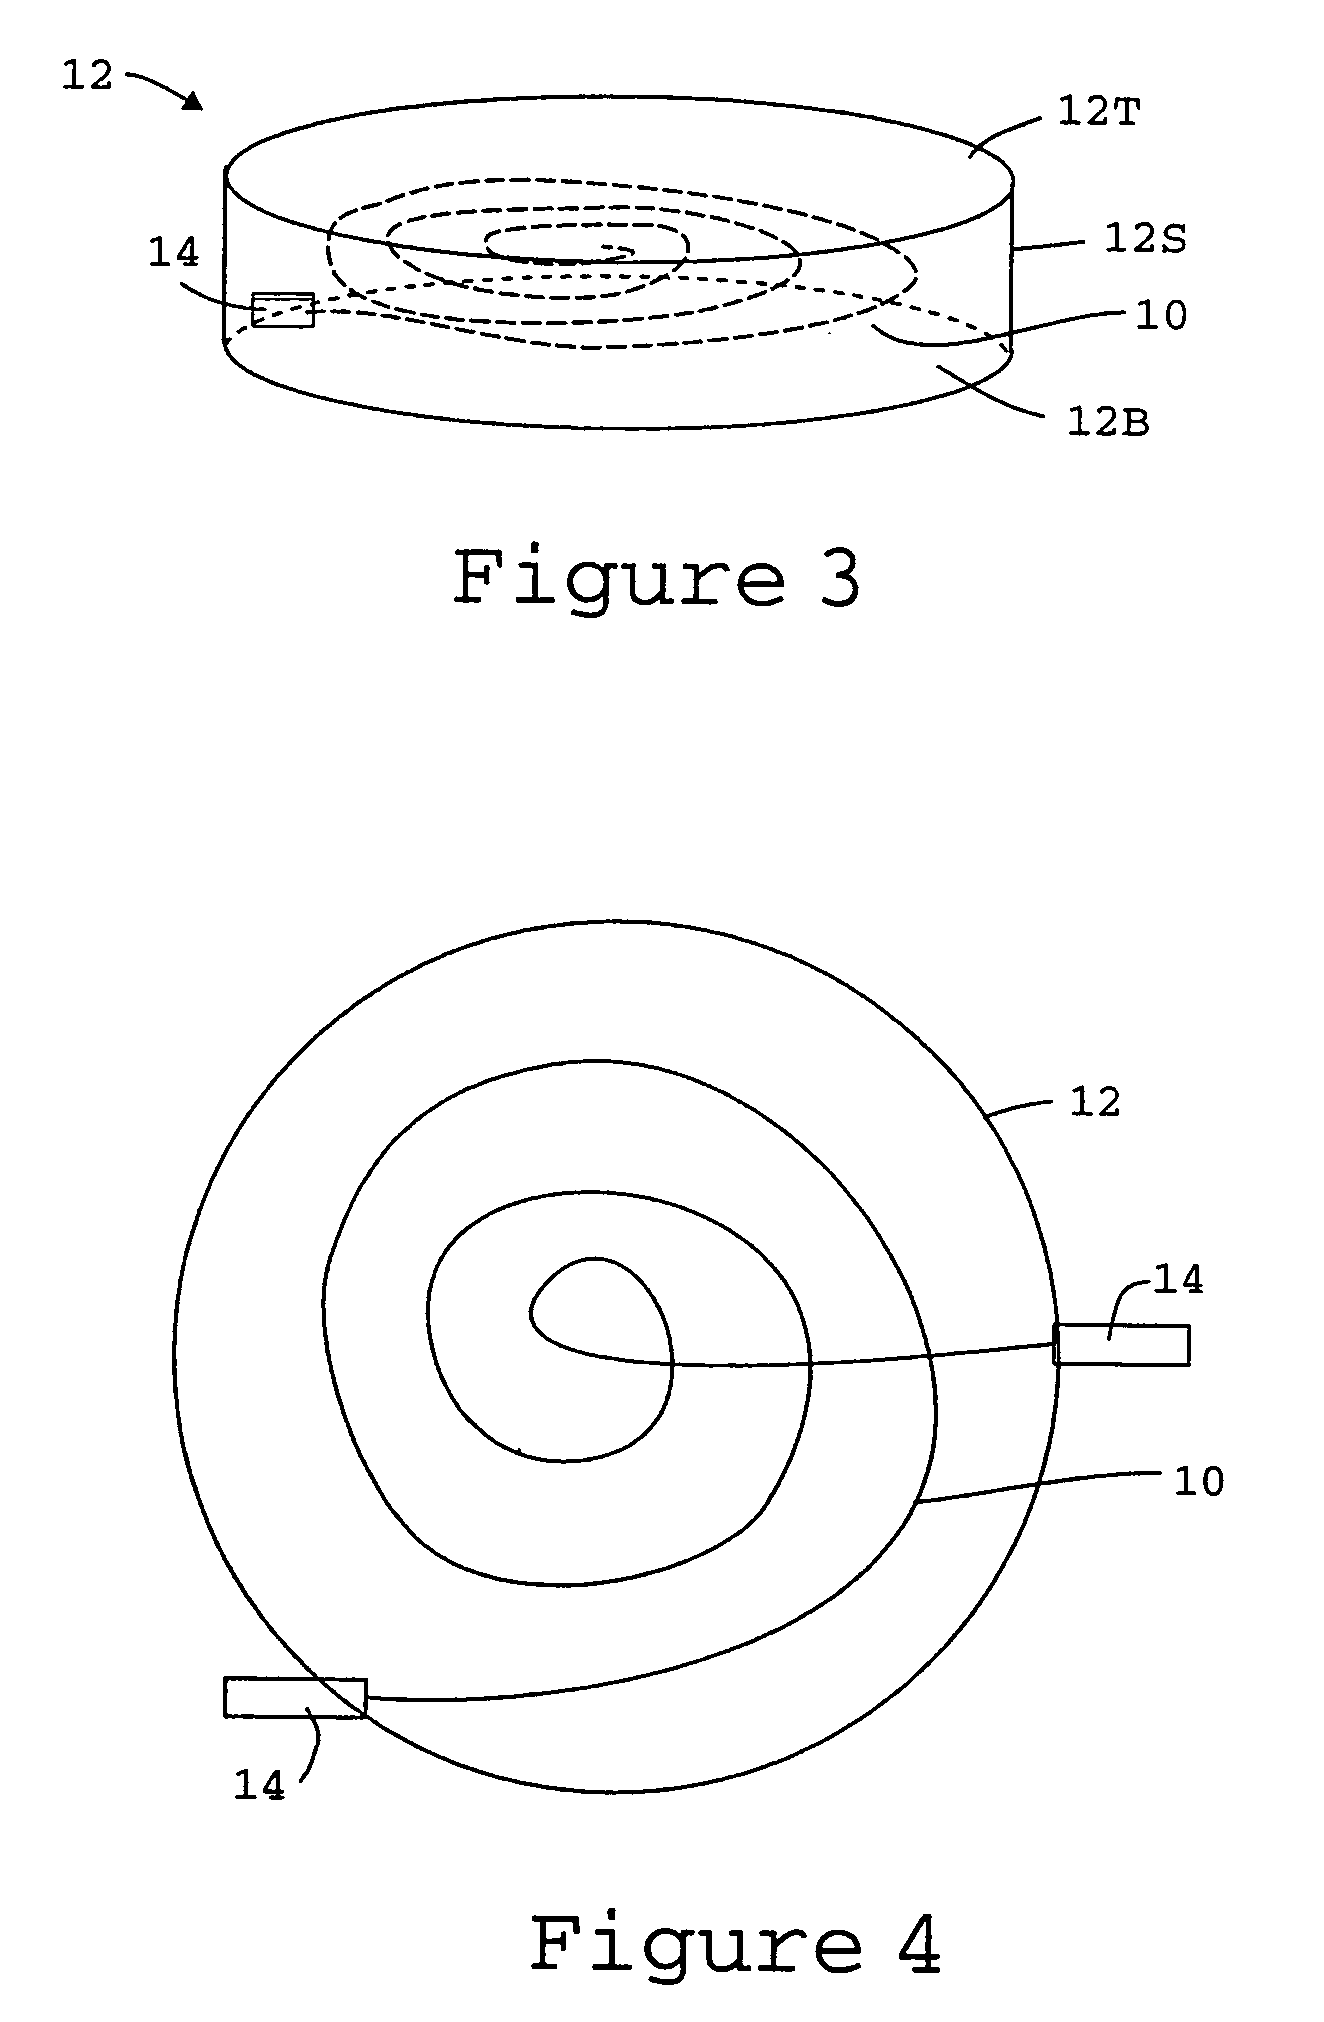 Compact phase-conjugate mirror and other optic devices